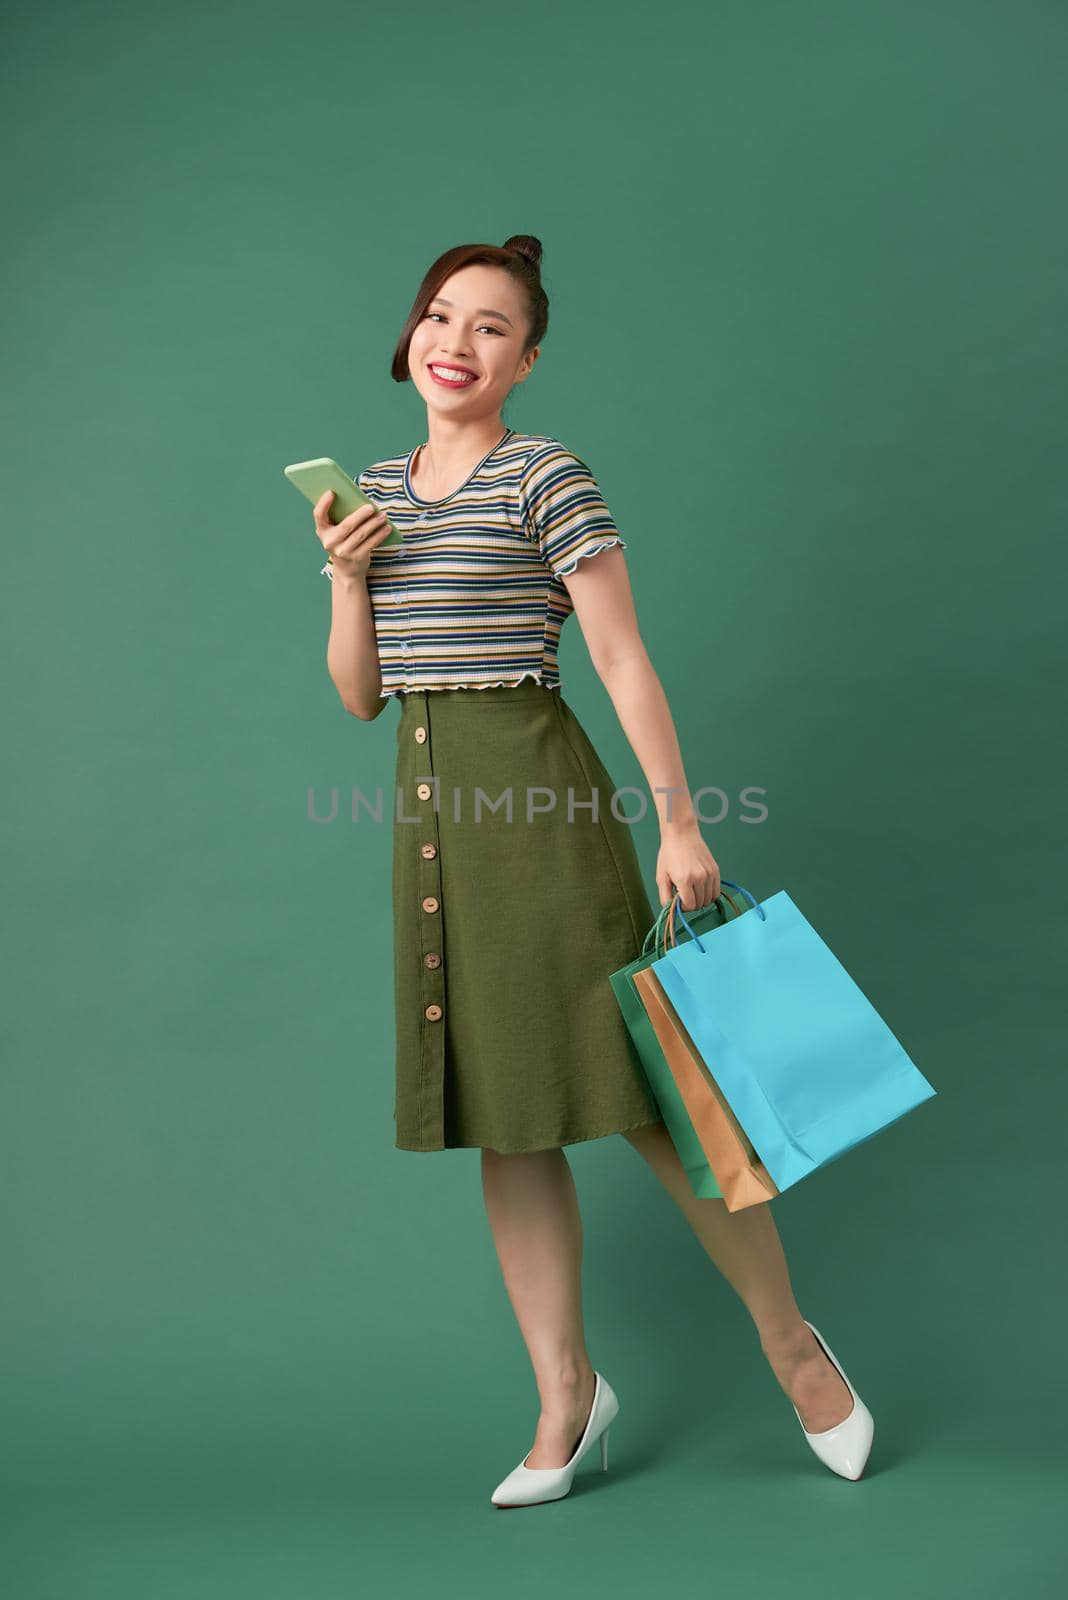 Full length portrait of a happy young woman holding shopping bags and mobile phone